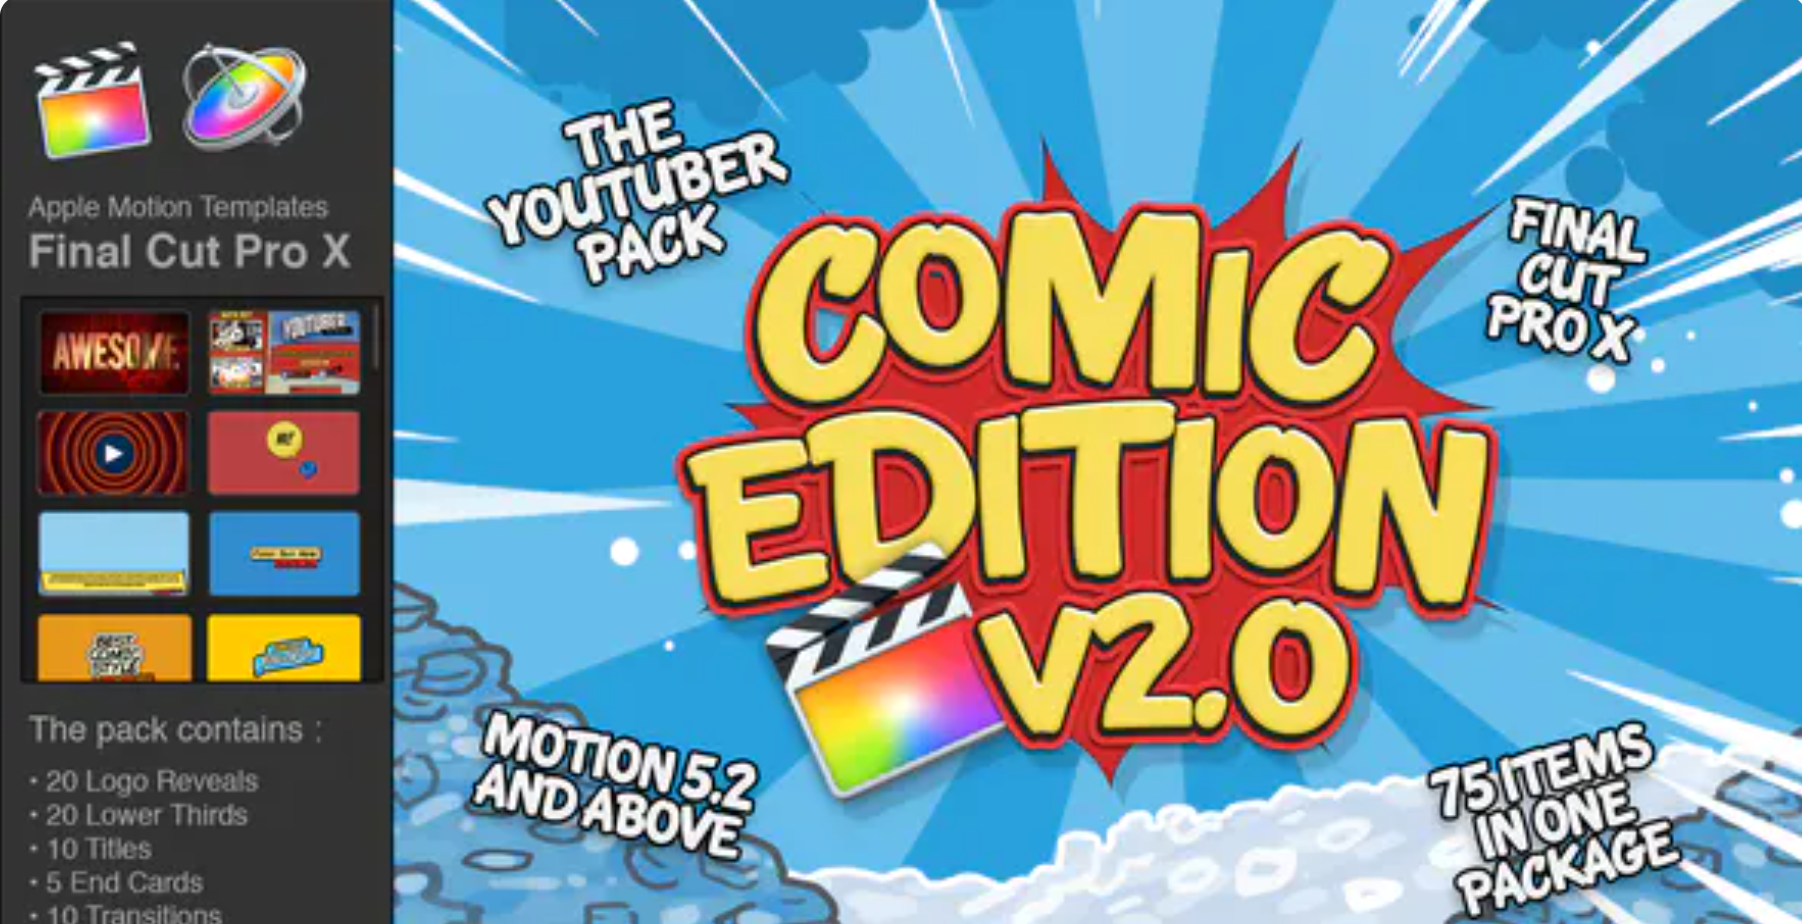 The YouTuber Pack - Comic Edition V2.0 - Final Cut Pro X 26